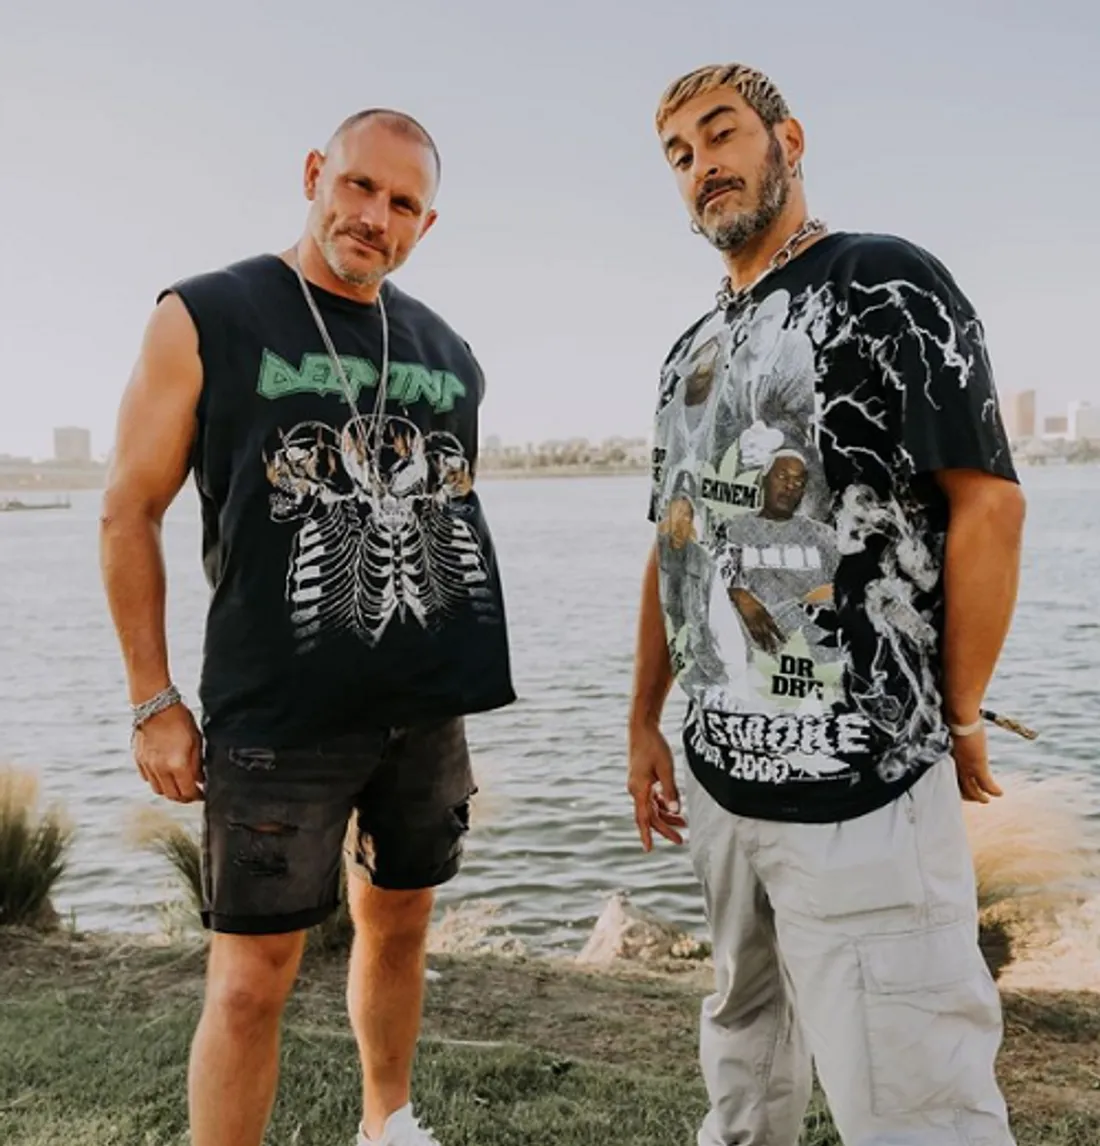 « THE MUSIC BEGAN TO PLAY » LE NOUVEAU TRACK HOUSE SIGNÉ ARMAND VAN HELDEN ET MARK KNIGHT